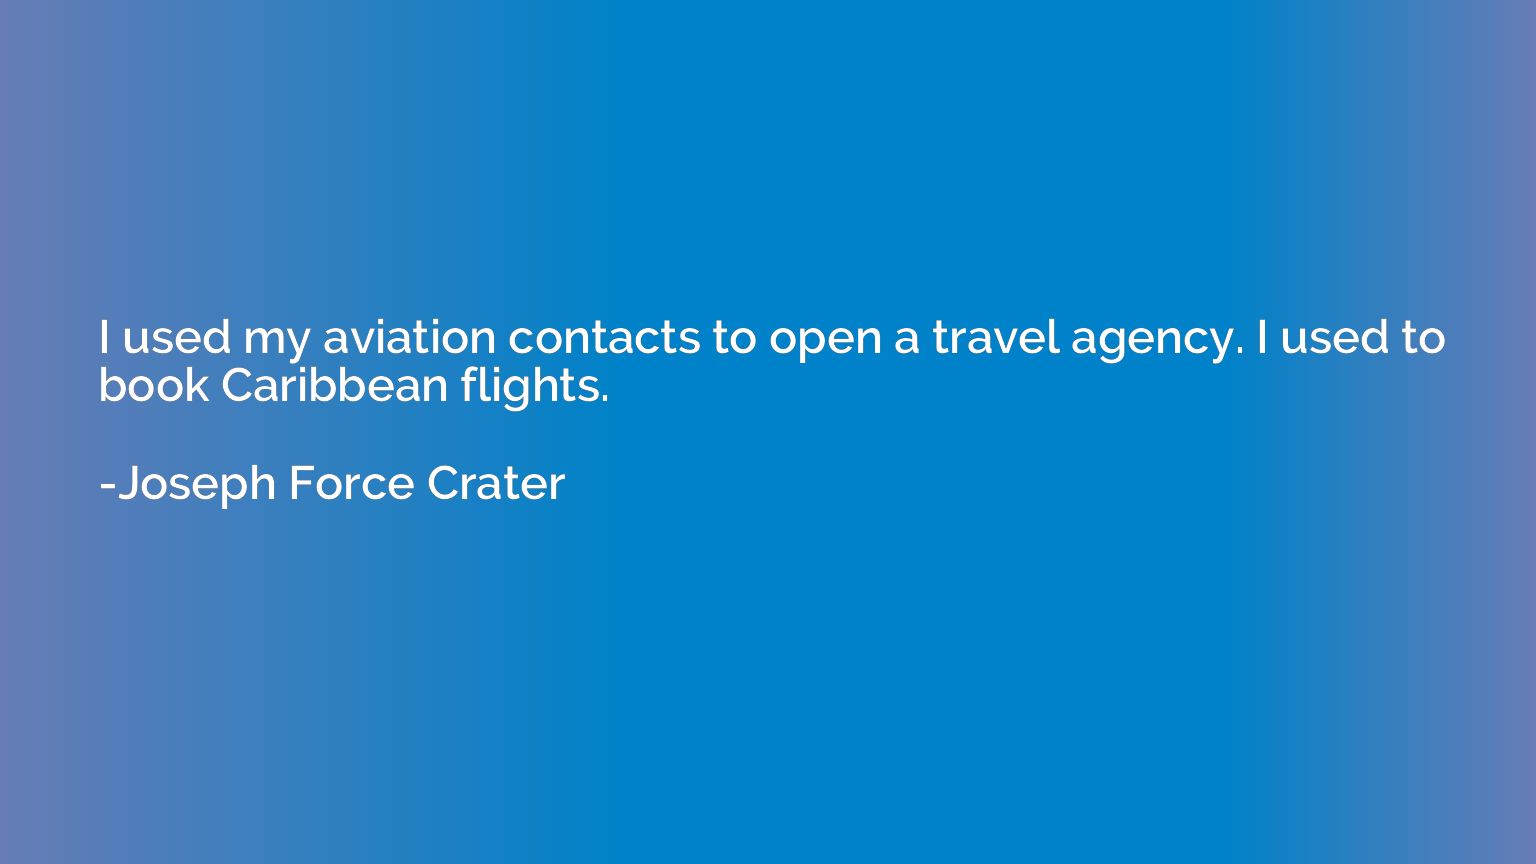 I used my aviation contacts to open a travel agency. I used 